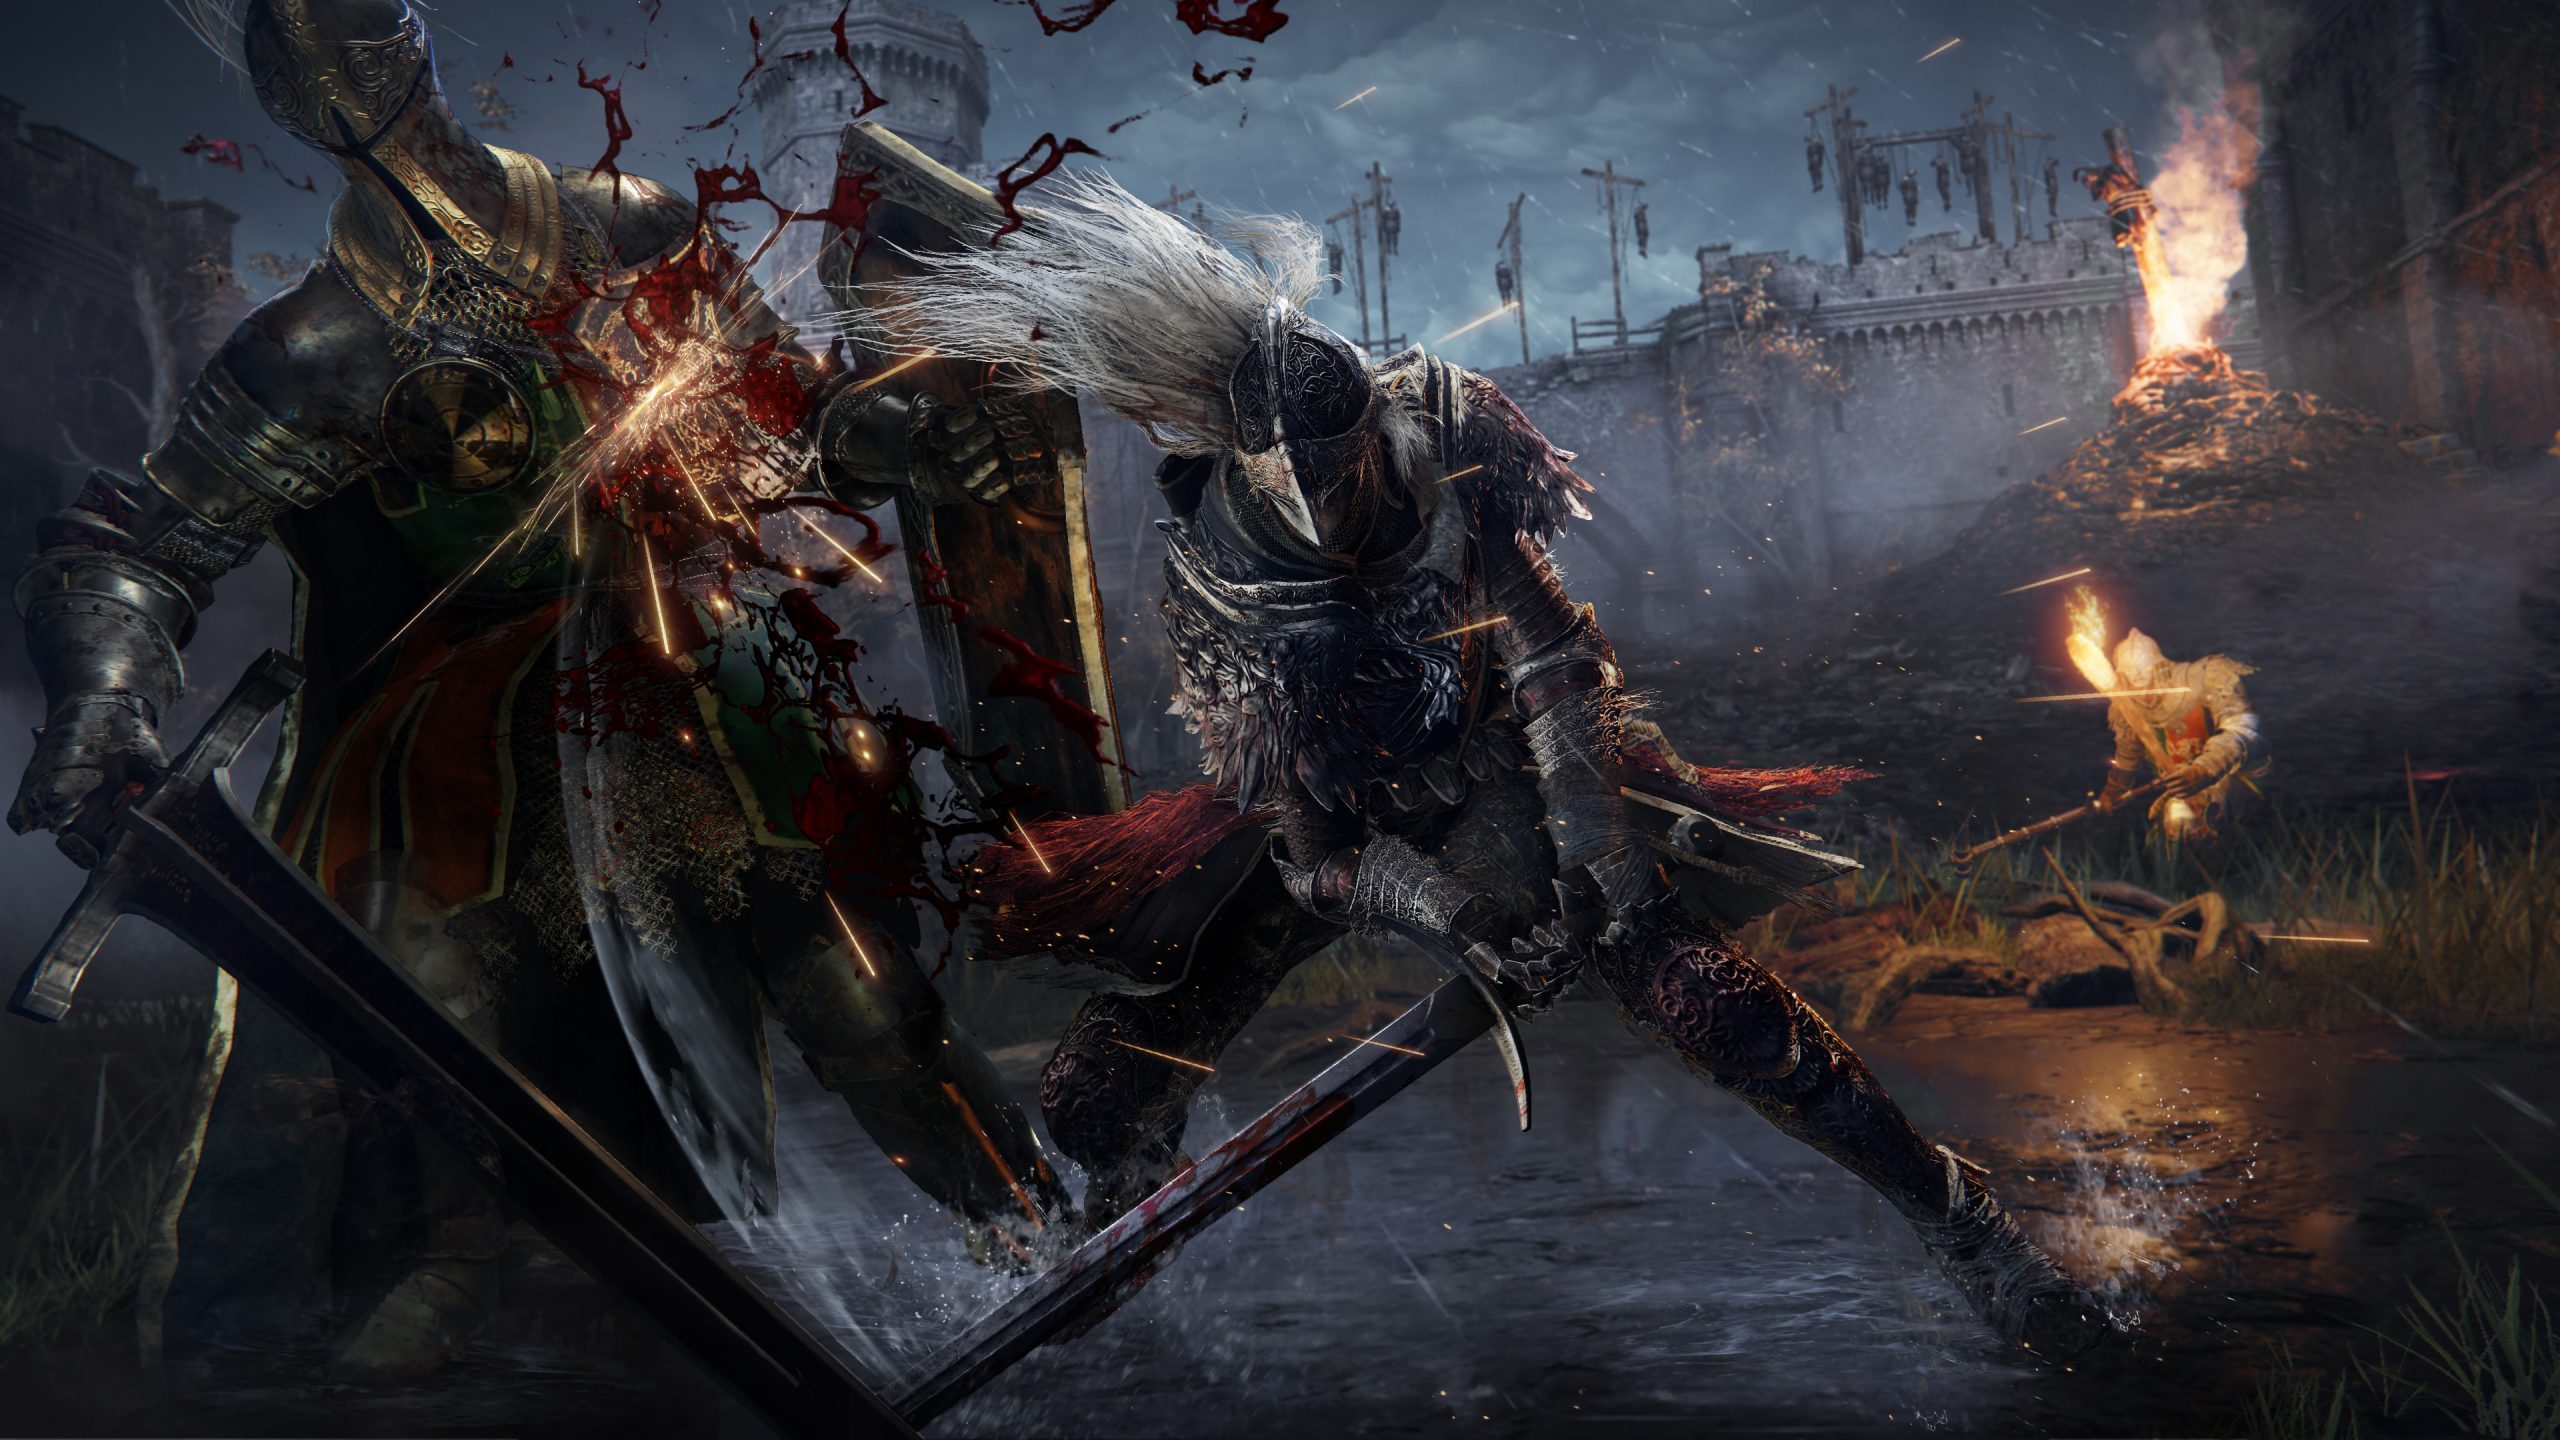 A still from the Elden Ring game showing two armored combatants, one striking the other with a sword